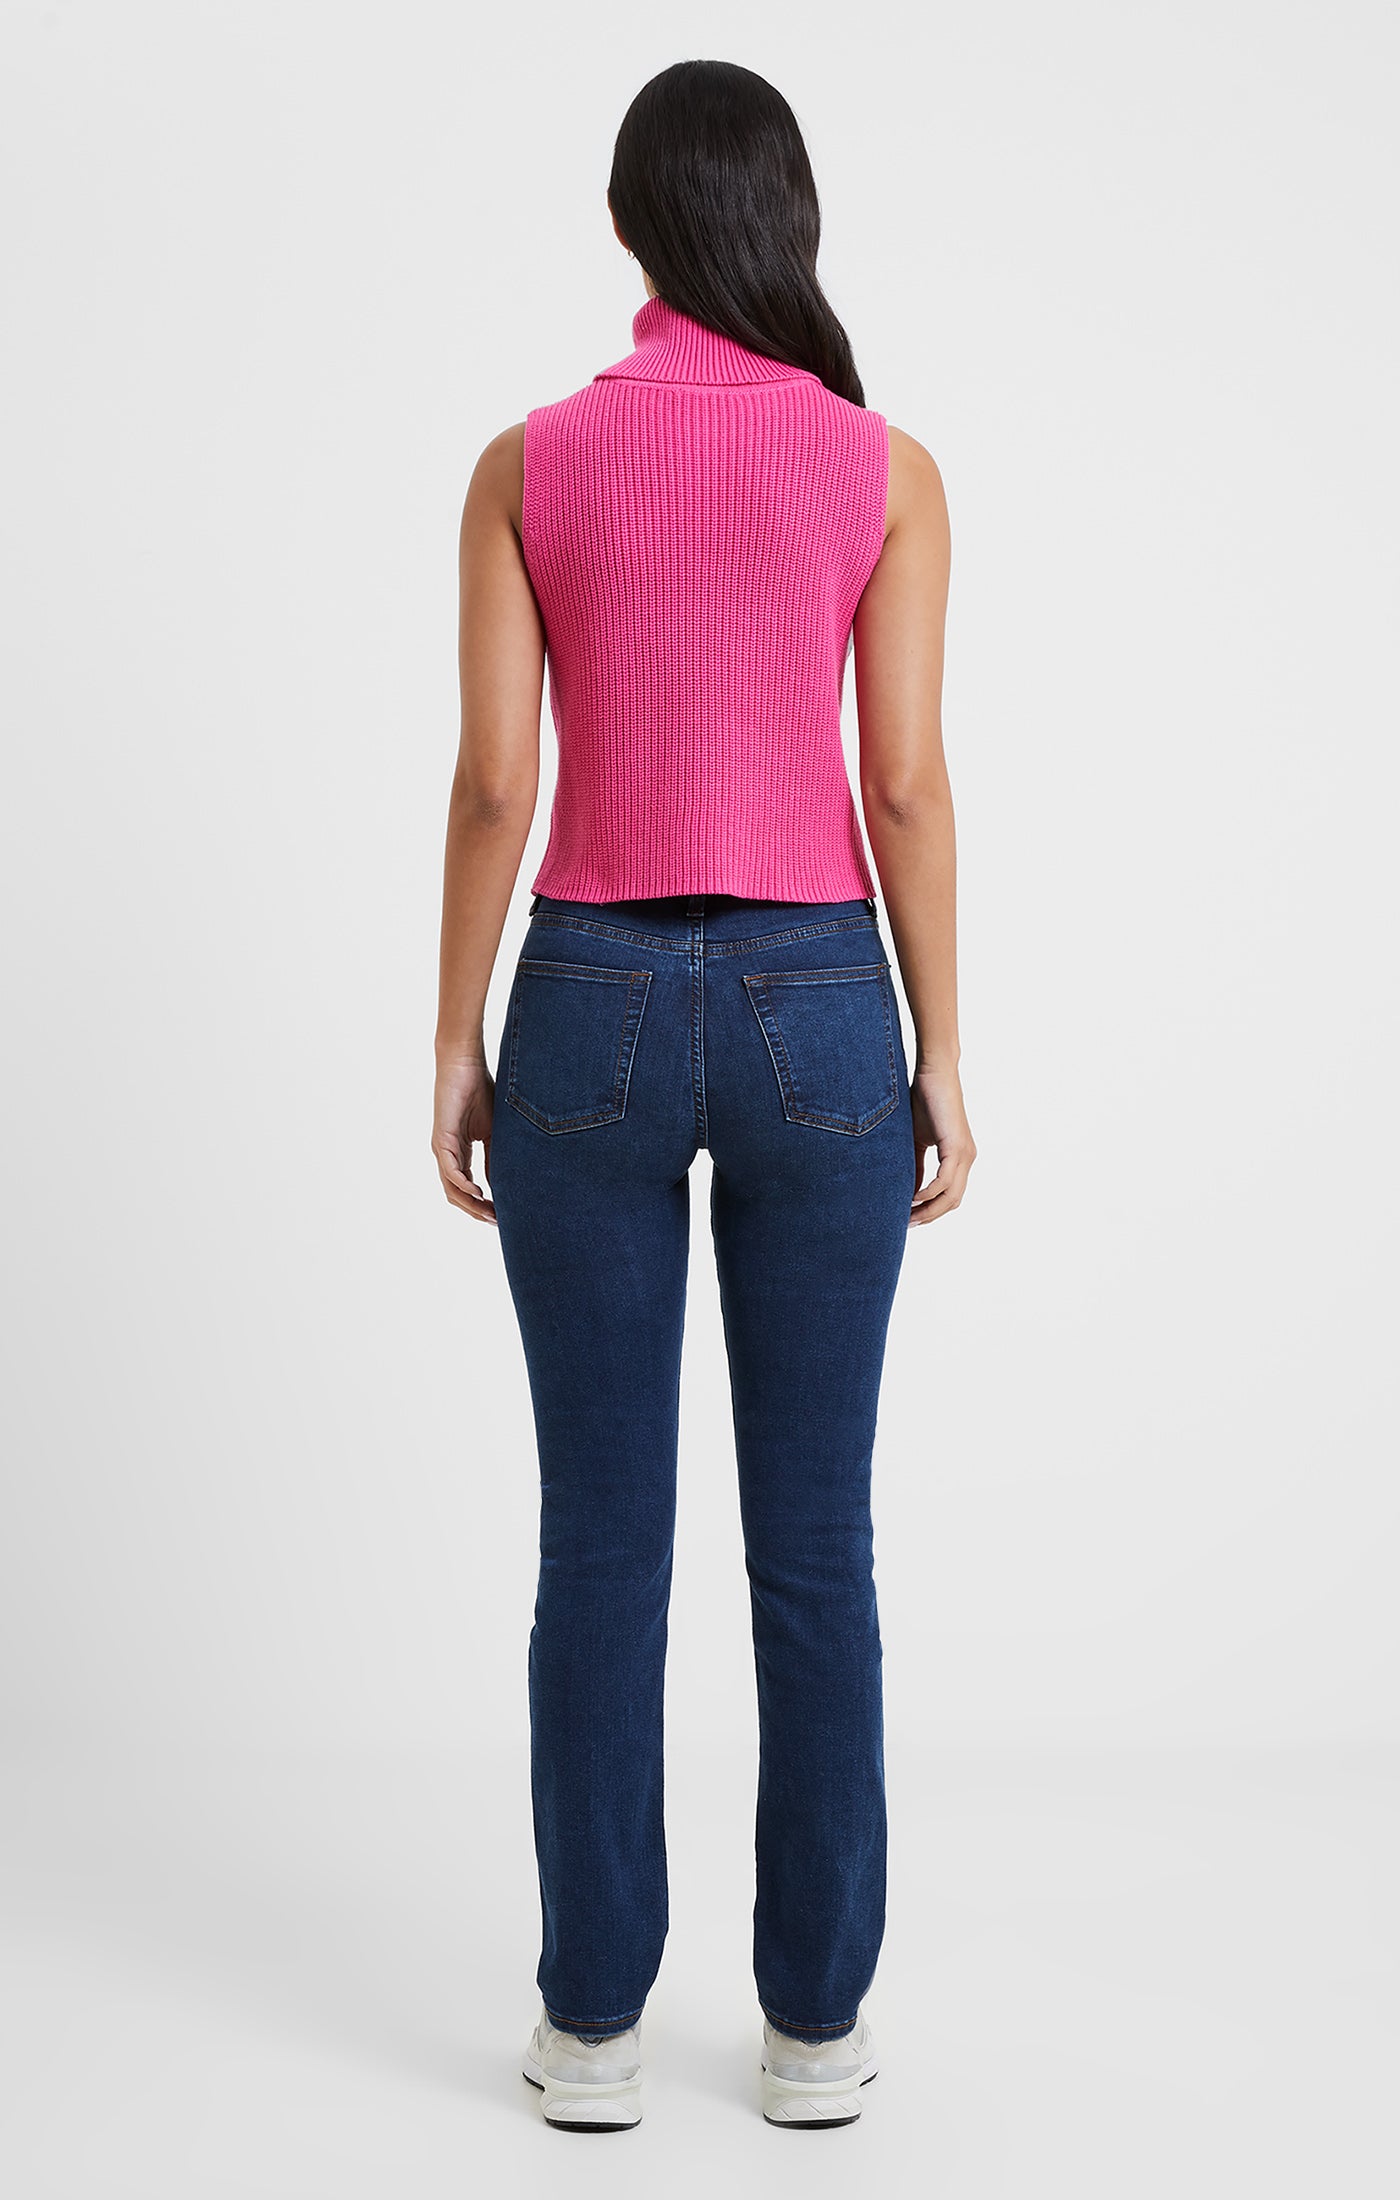 Mozart Cropped Sleeveless Jumper in Prosecco Pink